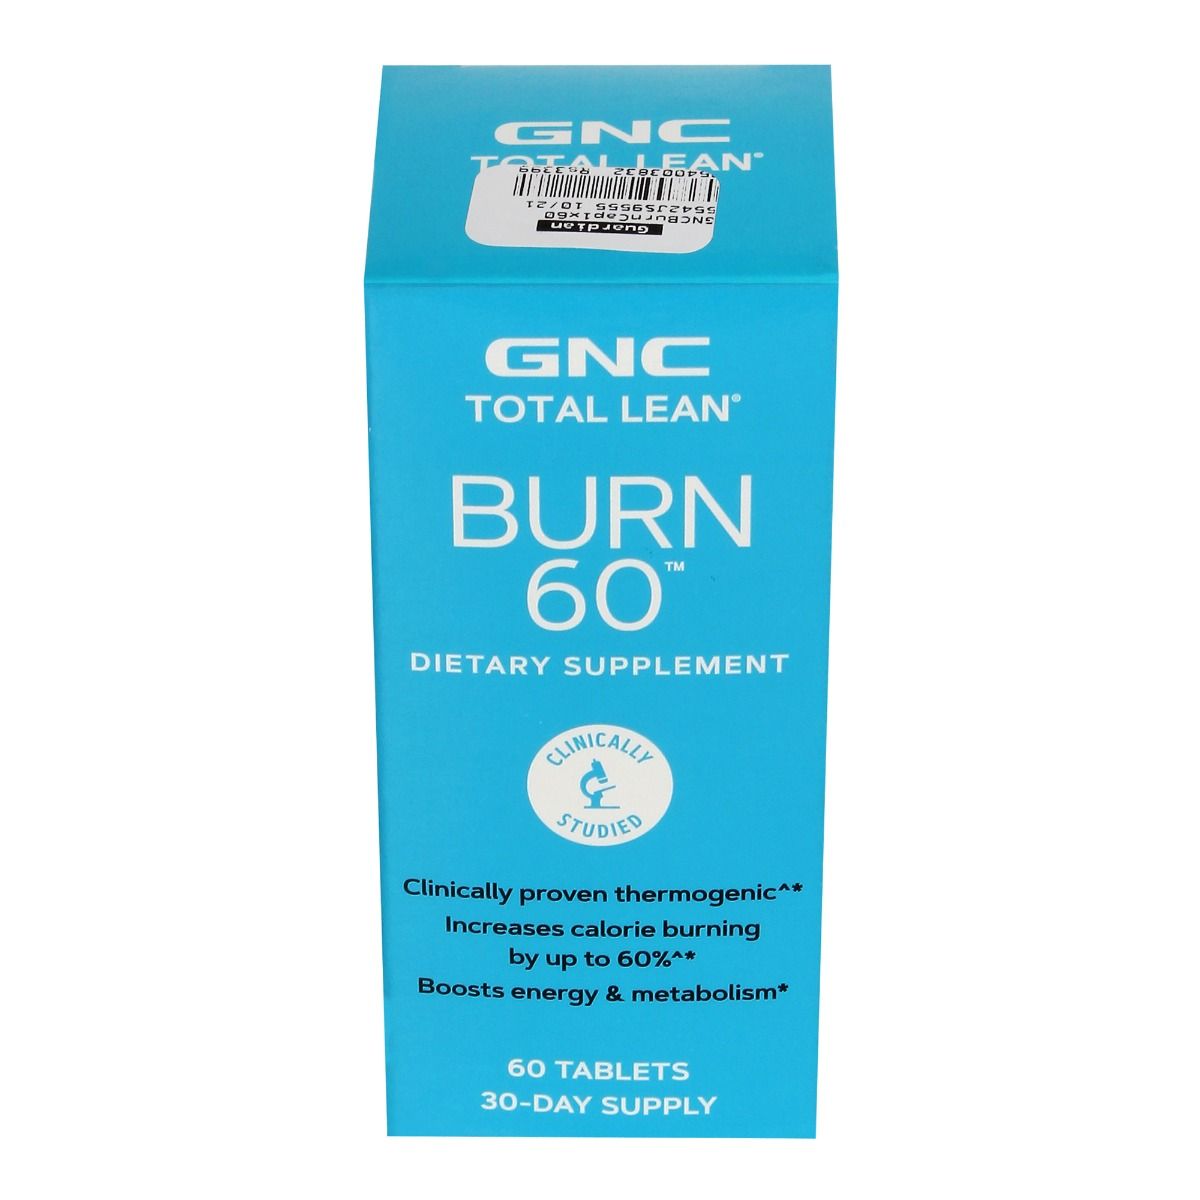 GNC Total Lean Burn 60 - Clinically Proven to Burn Calories Up to 60% Faster - 